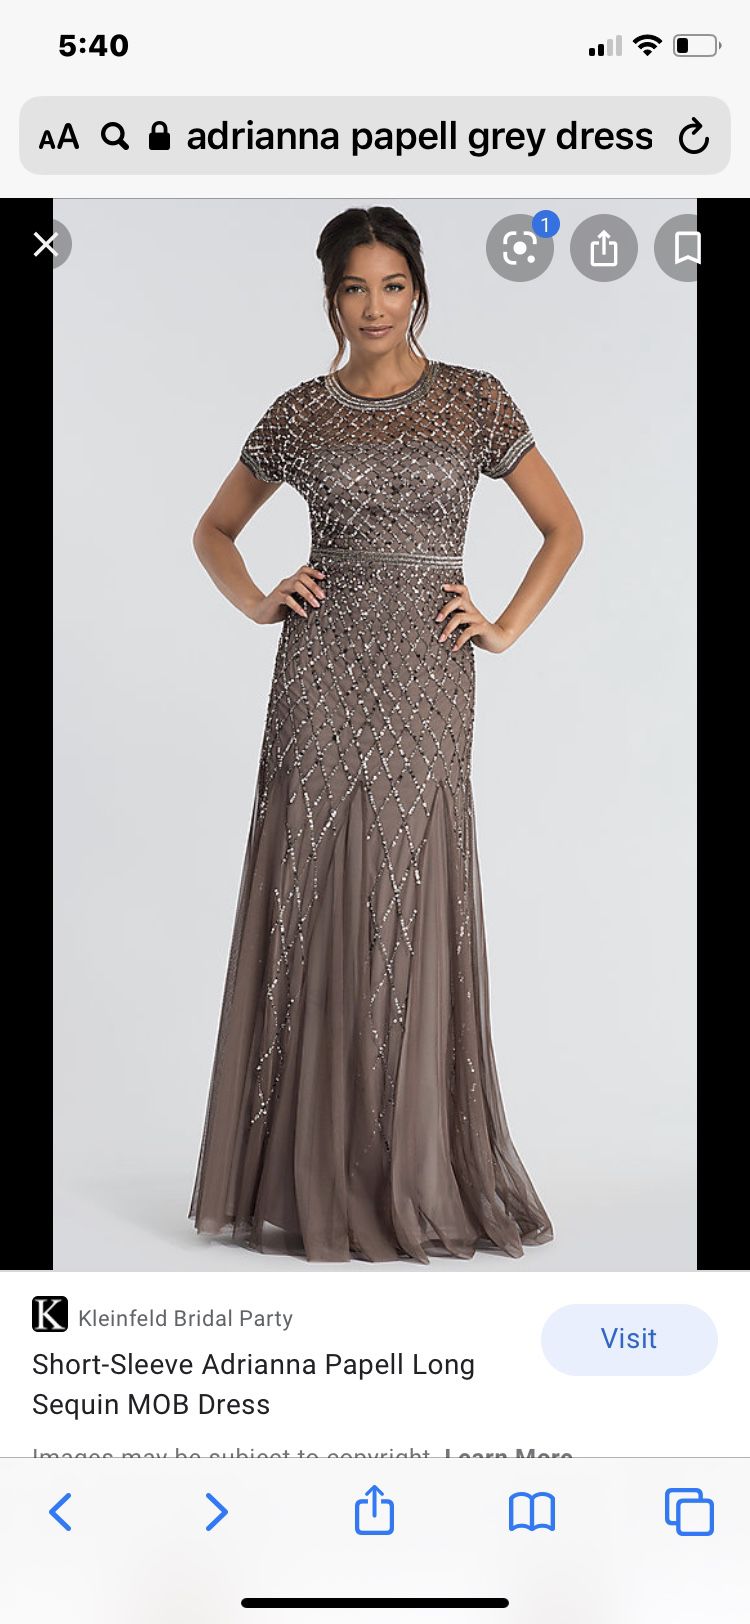 Adrianna paperless dress lead color gray brown sequin wedding